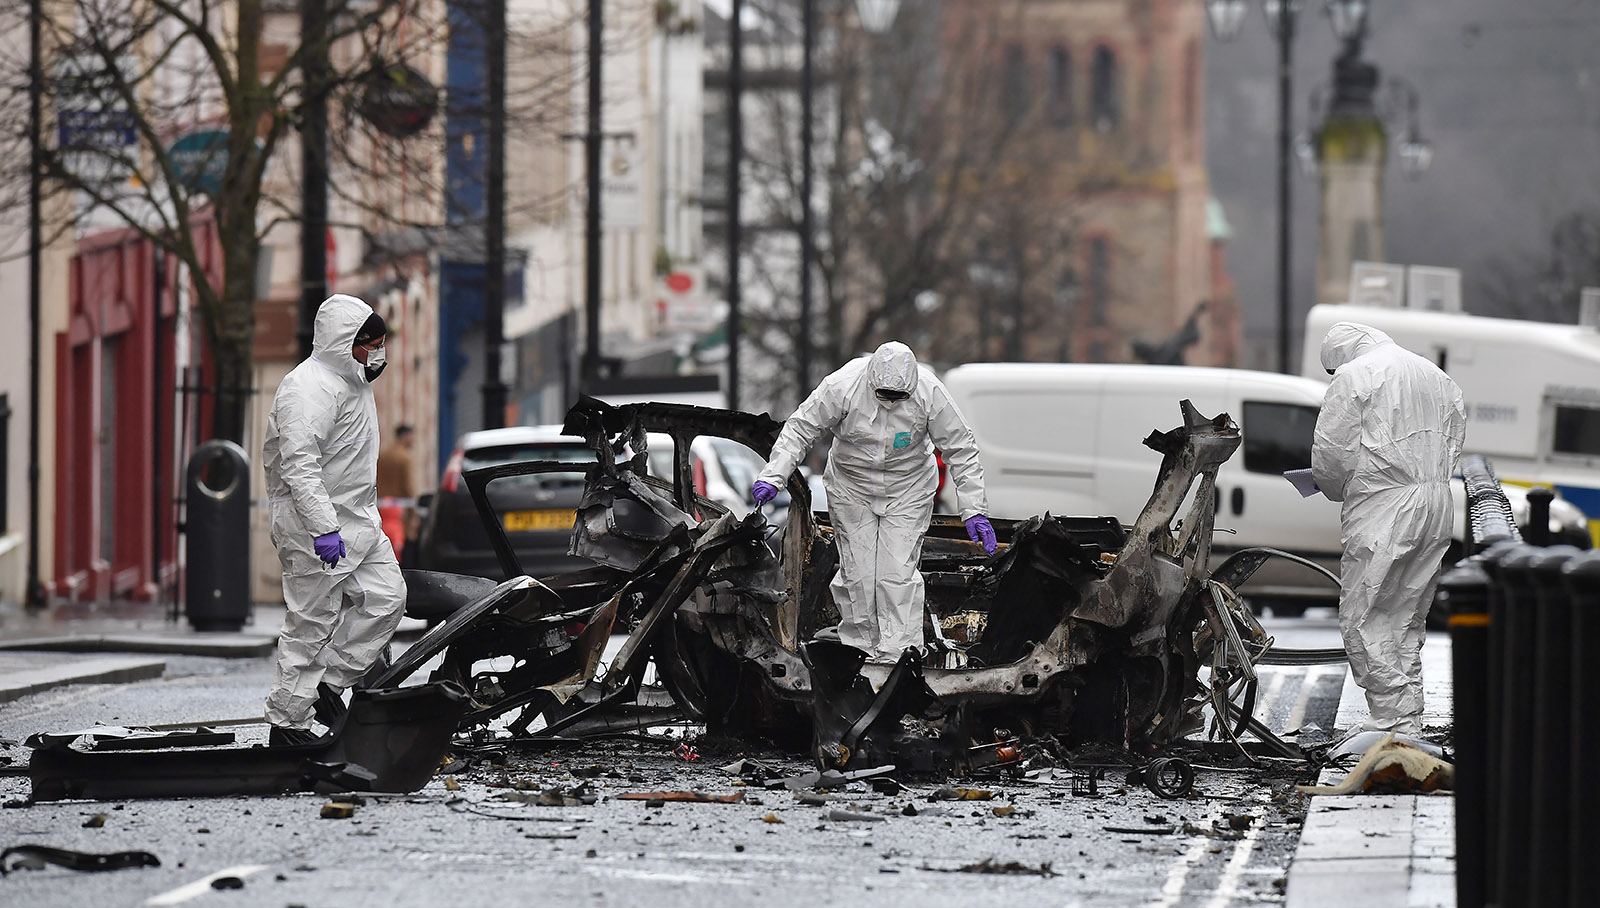 Forensic officers inspecting the remains of a van used as a car bomb in an attack by dissident Republicans outside Derry Court House, Northern Ireland, January 20, 2019